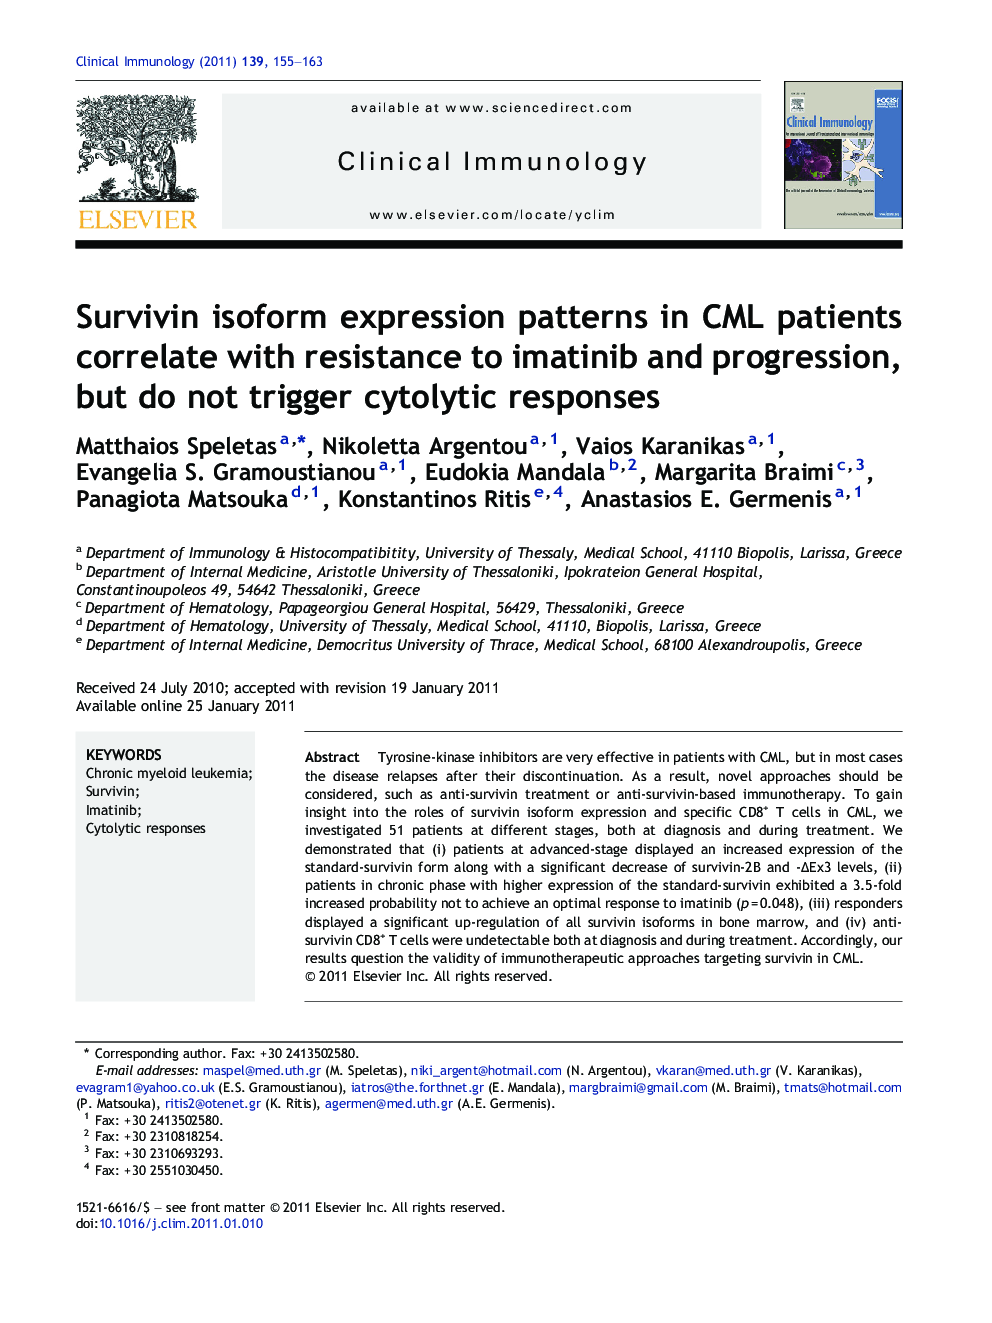 Survivin isoform expression patterns in CML patients correlate with resistance to imatinib and progression, but do not trigger cytolytic responses